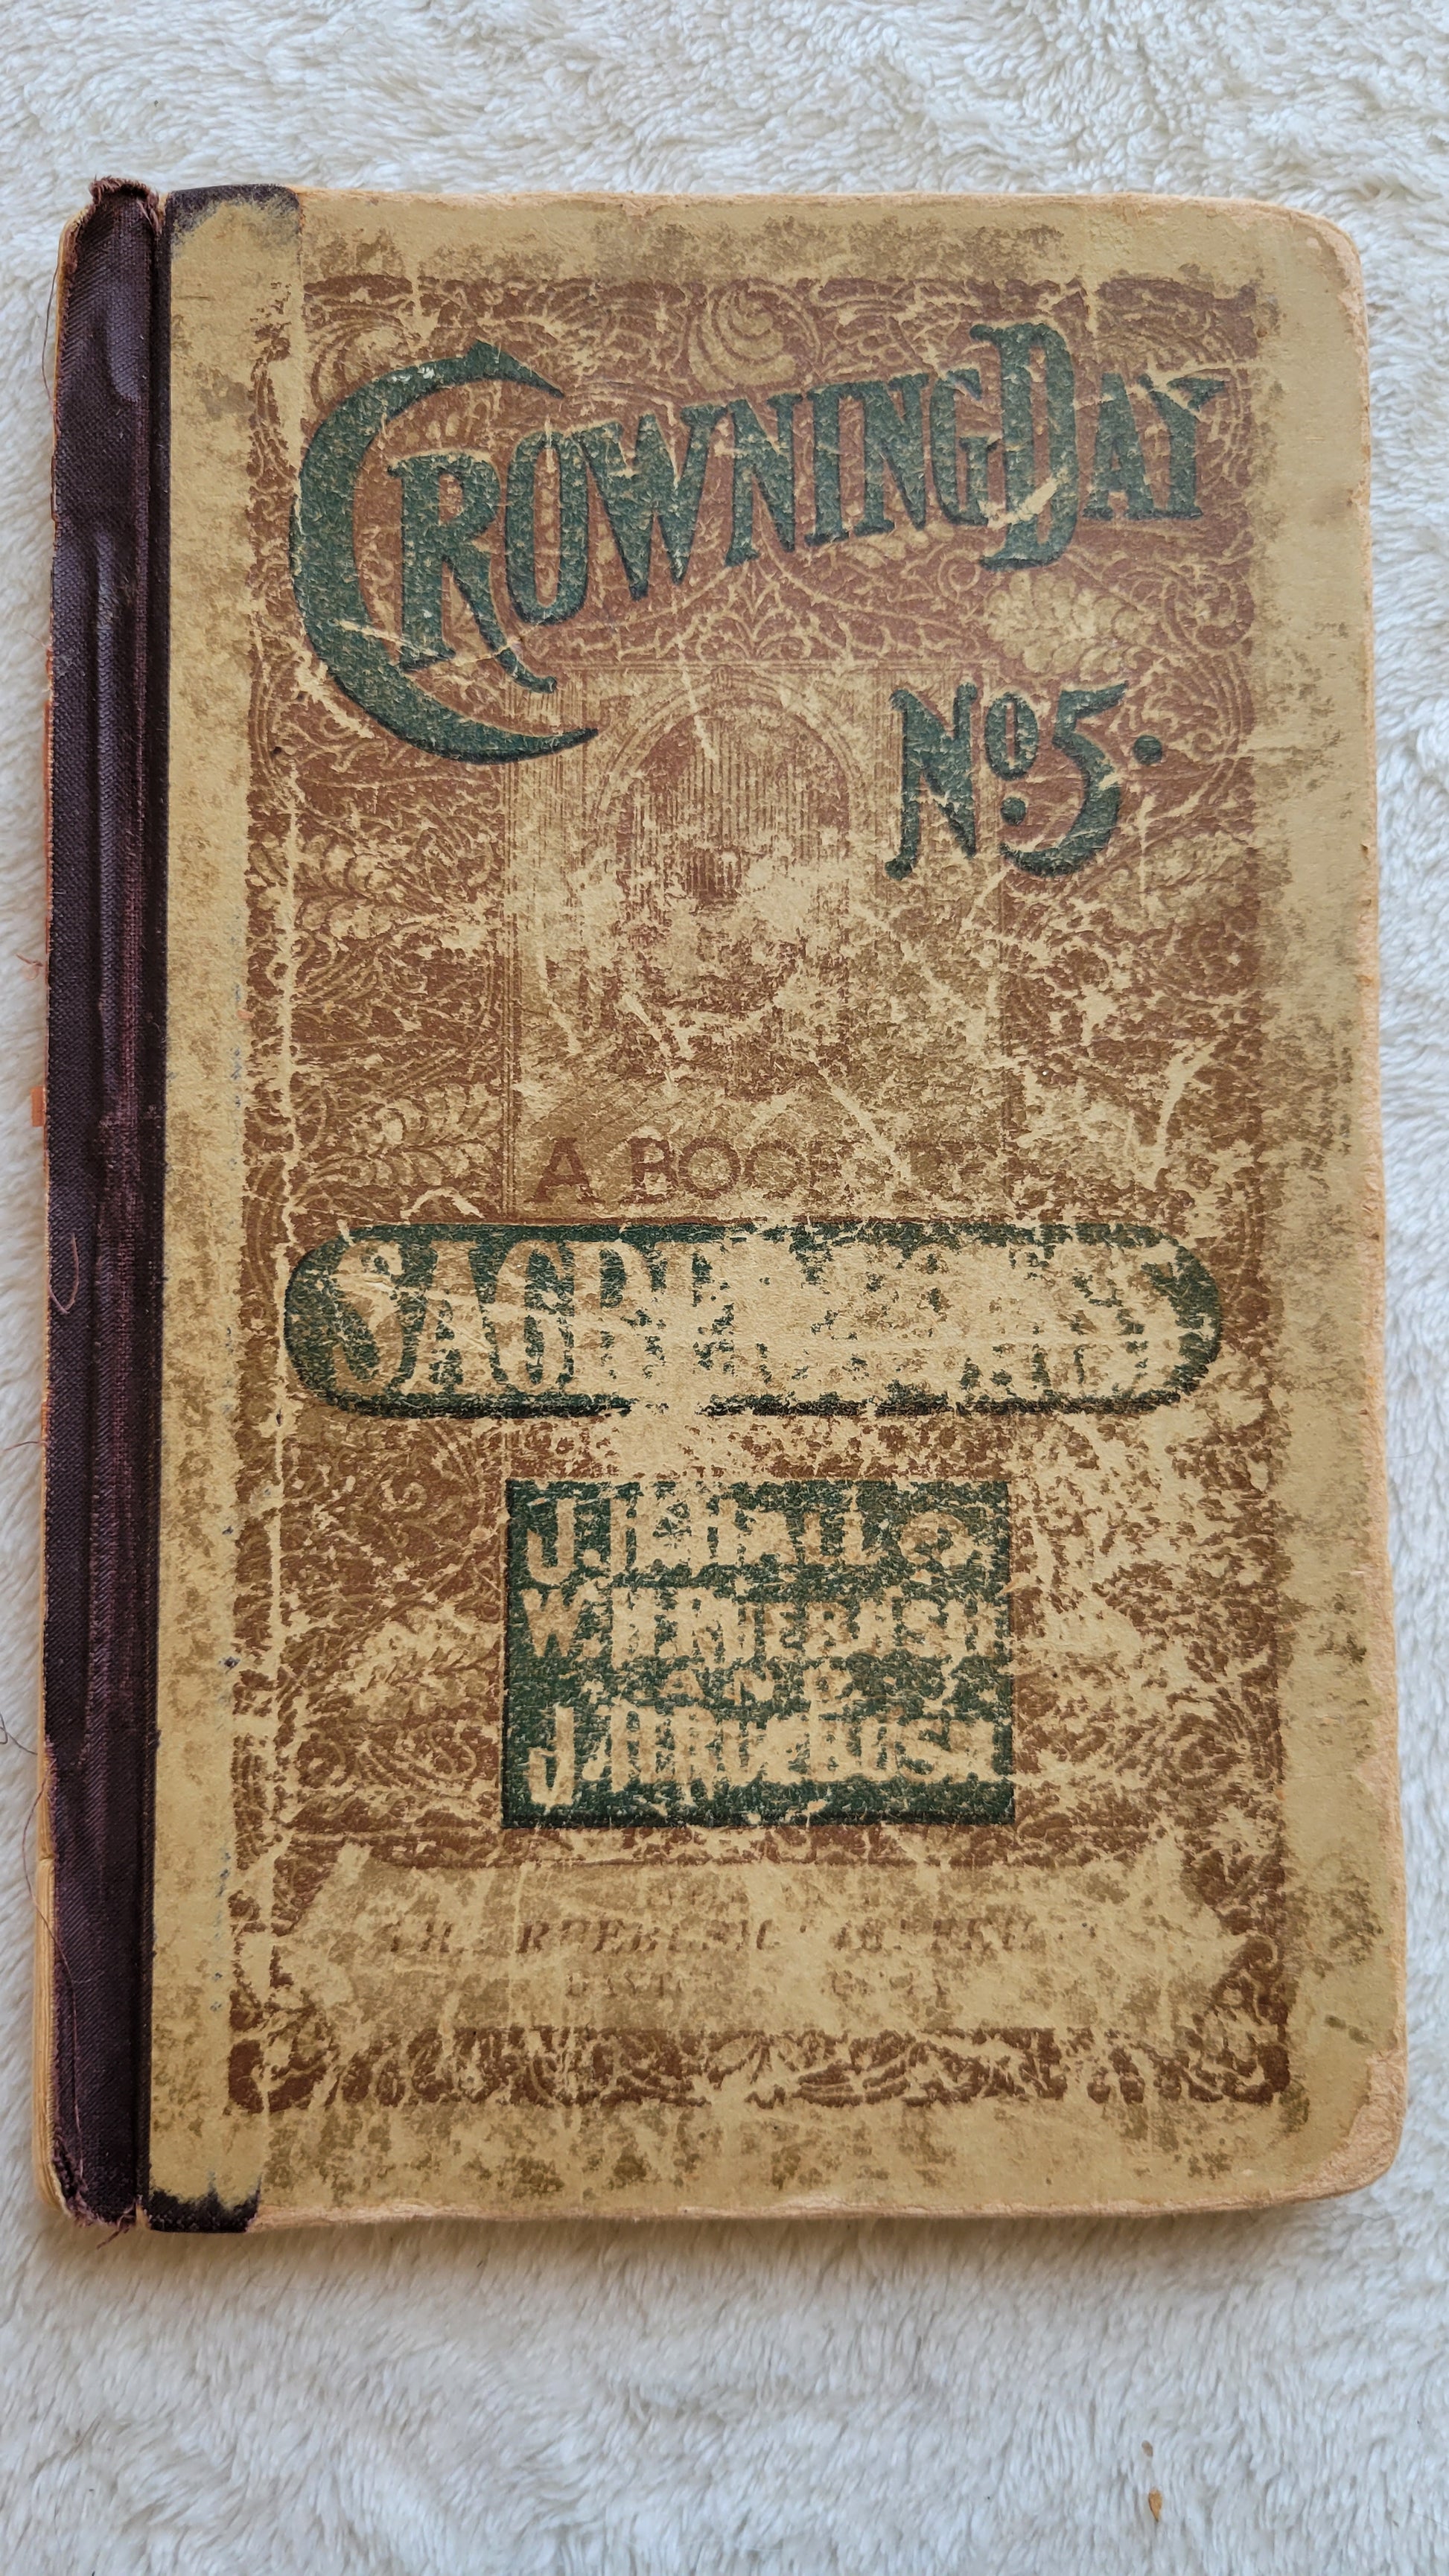 Antique book Crowning Day No. 5 is a Christian hymn book, copyrighted in 1902 by J. H. Hall, W. H. Ruebush, and J. H. Ruebush and published by the Ruebush-Kieffer Company, Dayton, Virginia.  View of front cover.